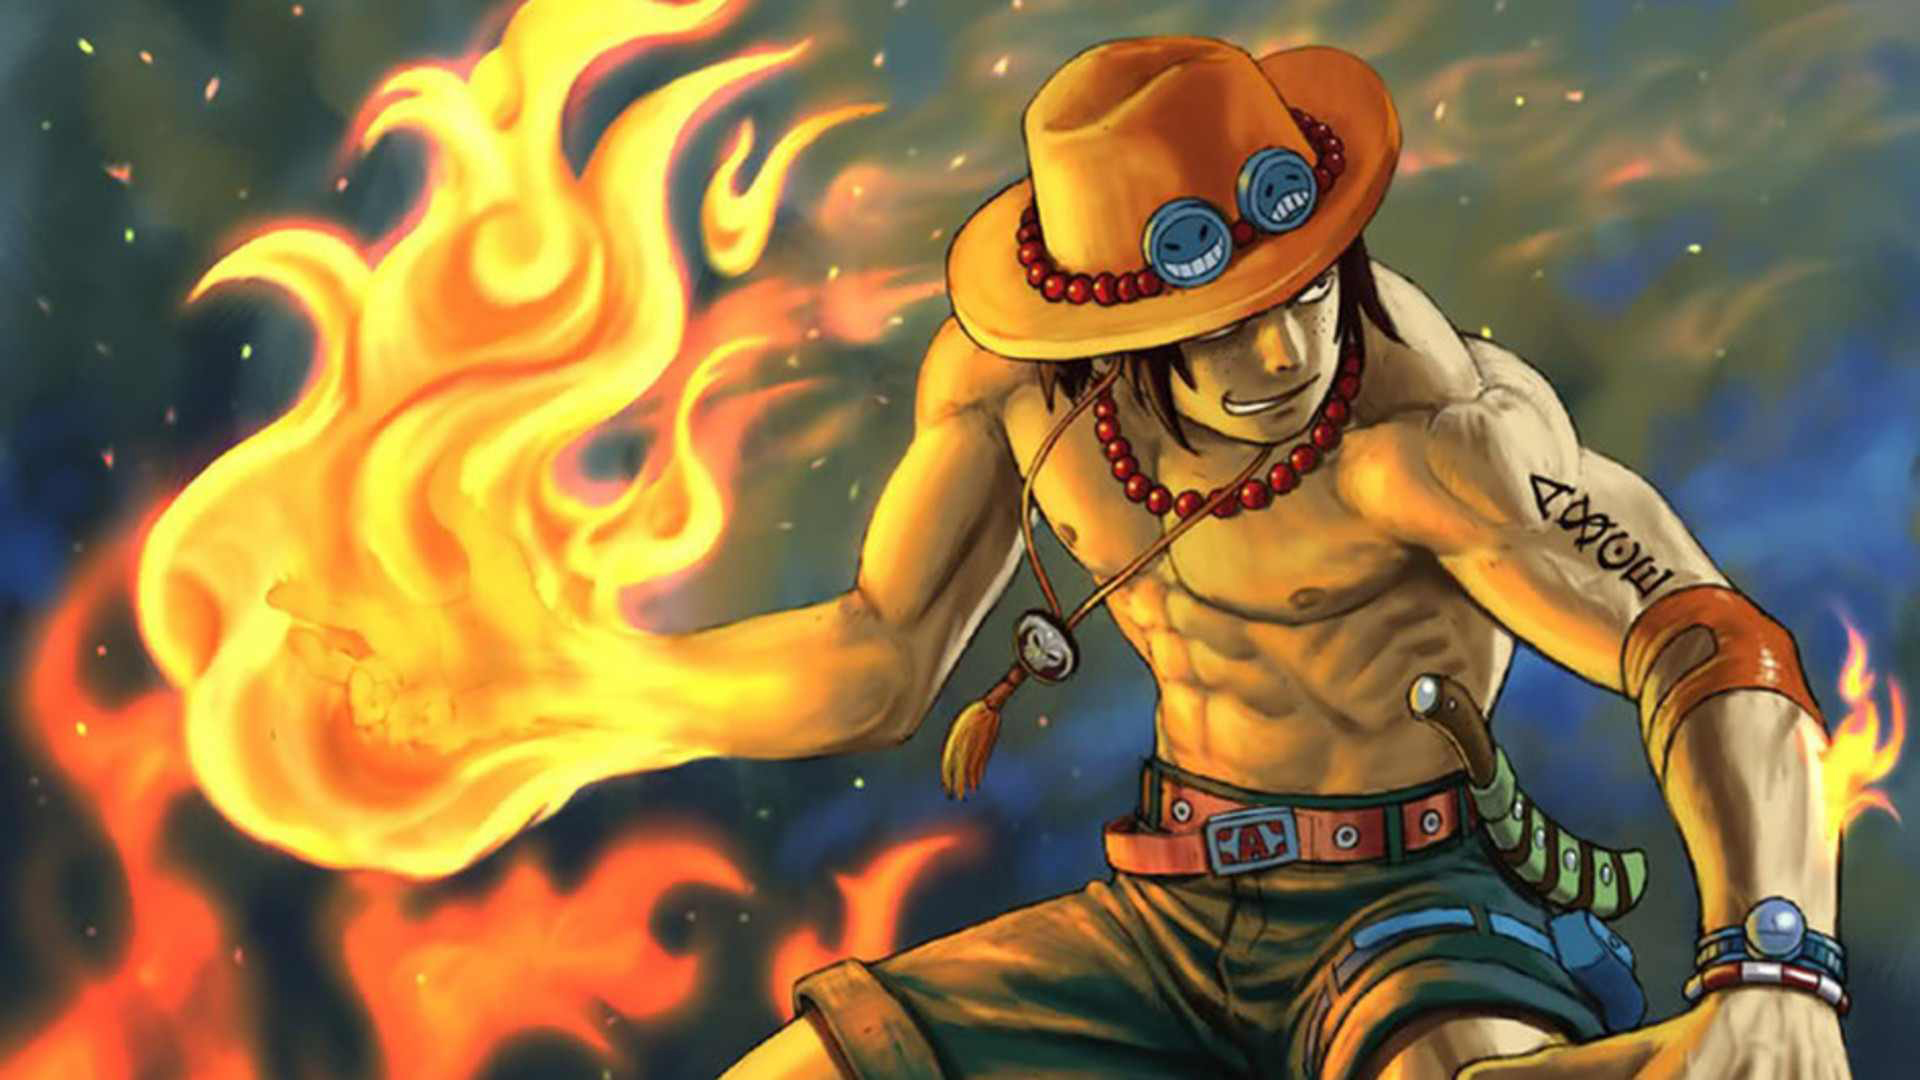 one piece wallpaper free download,cg artwork,illustration,fictional character,mythology,adventure game